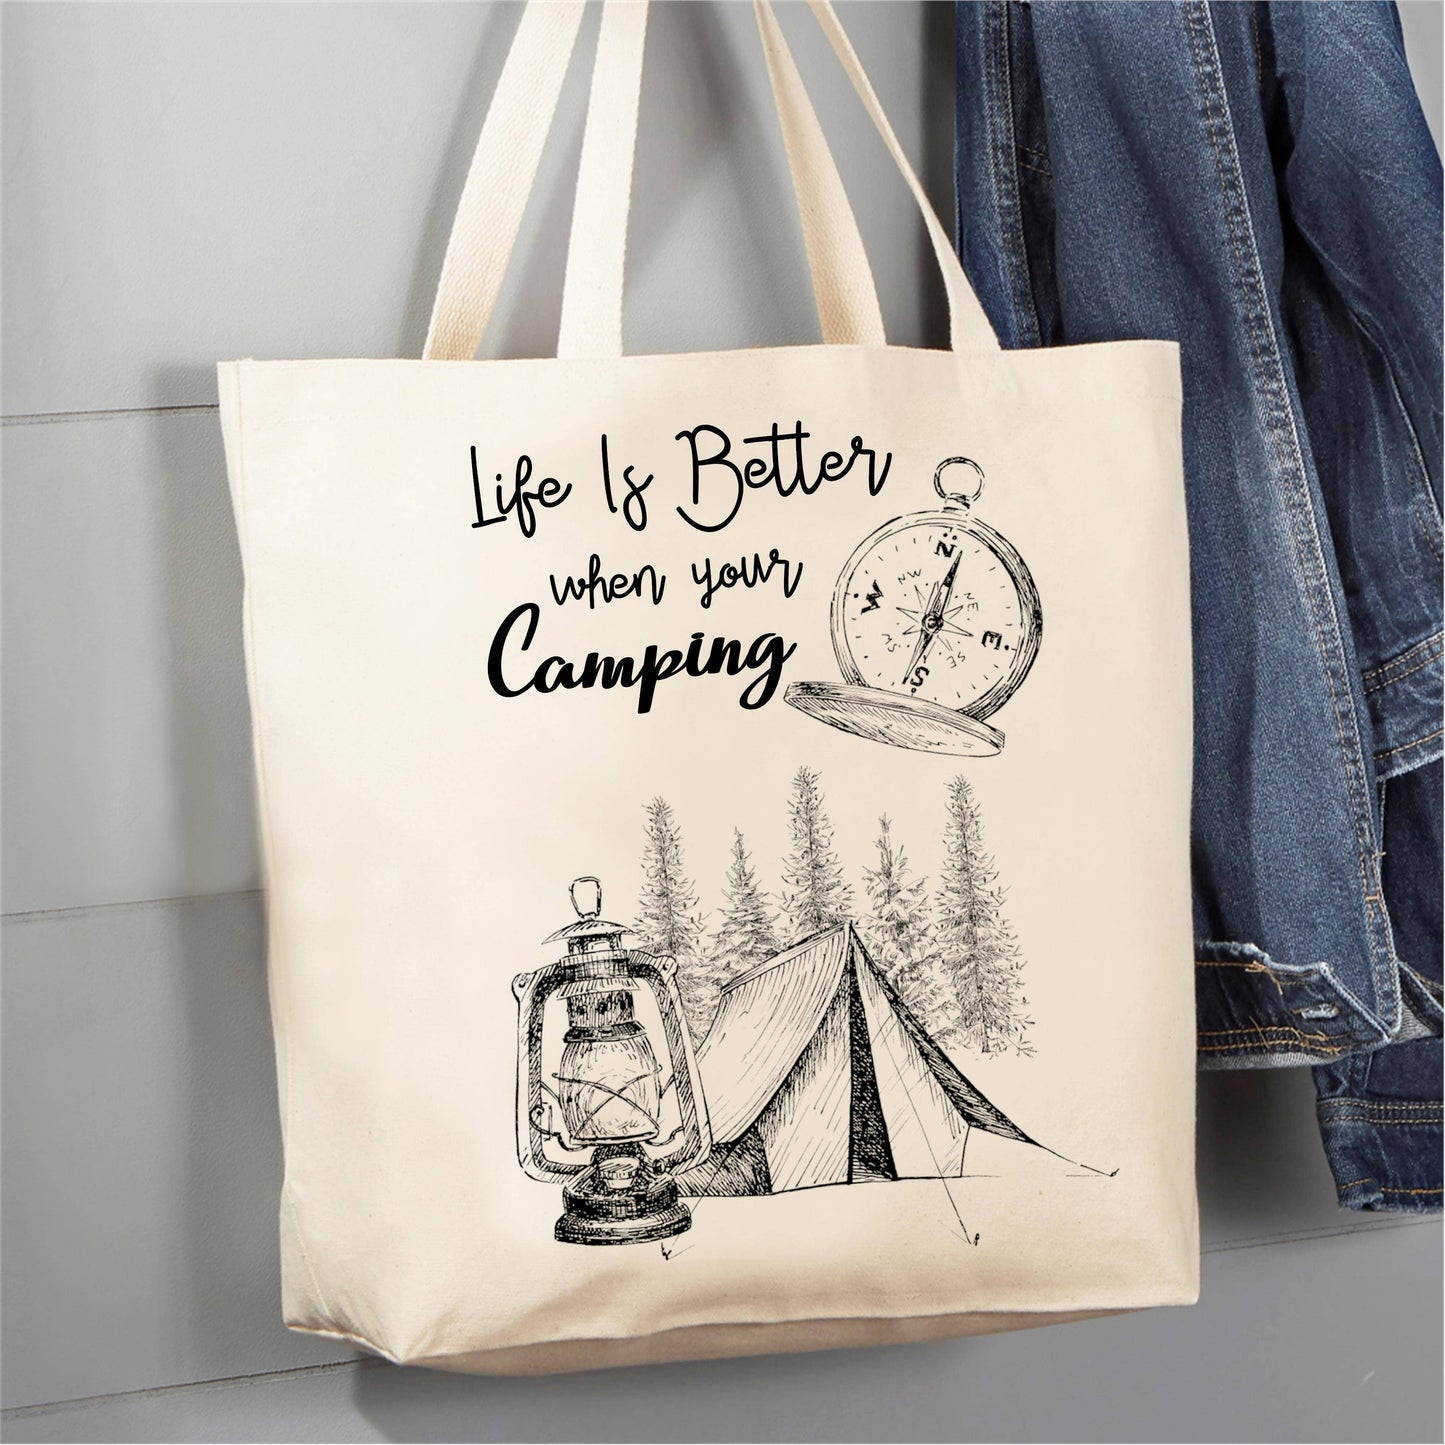 Life is better Camping 12 oz  Canvas Tote Bag